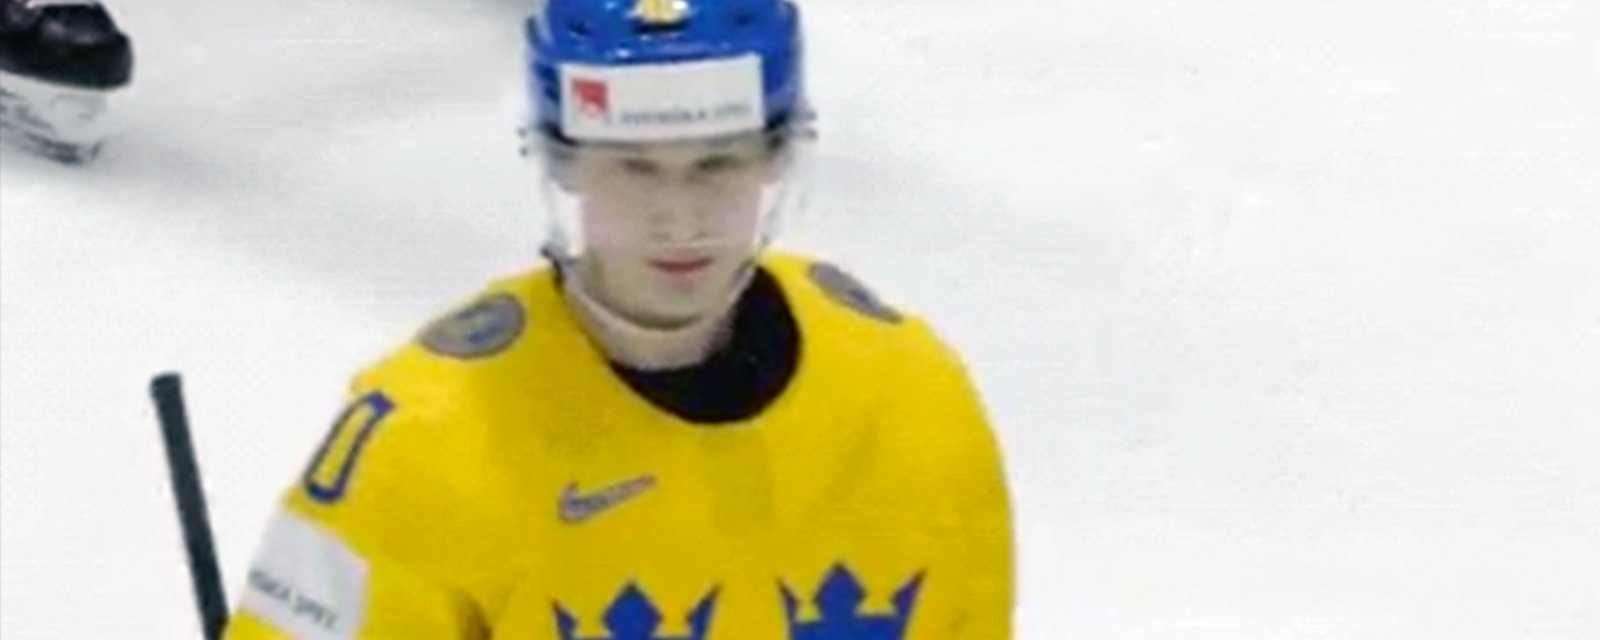 Pettersson snipes a beauty then gives a death stare to the entire Latvian bench